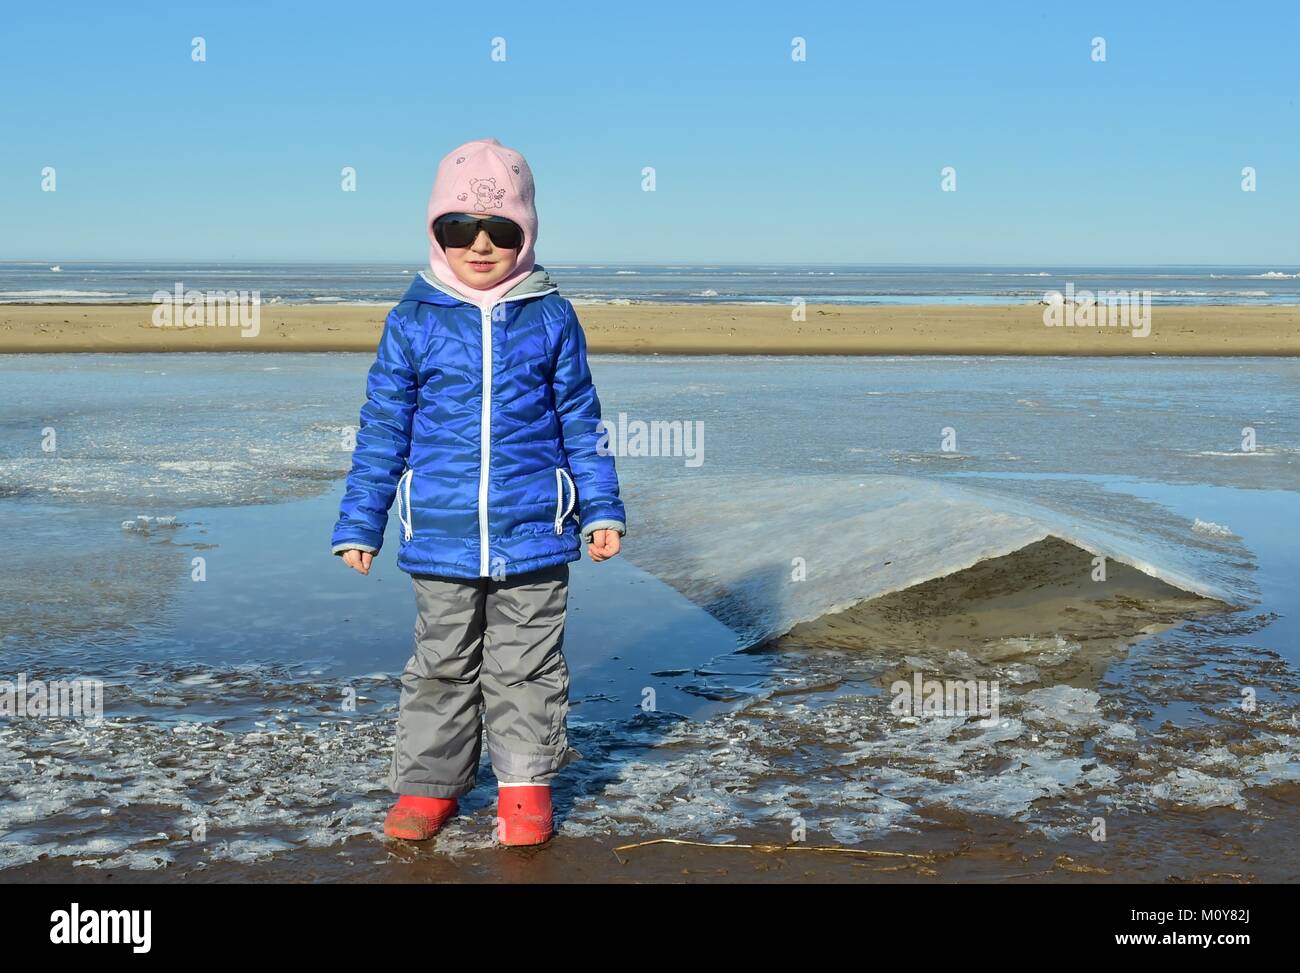 The little girl in big sunglasses on ice. Winter Stock Photo